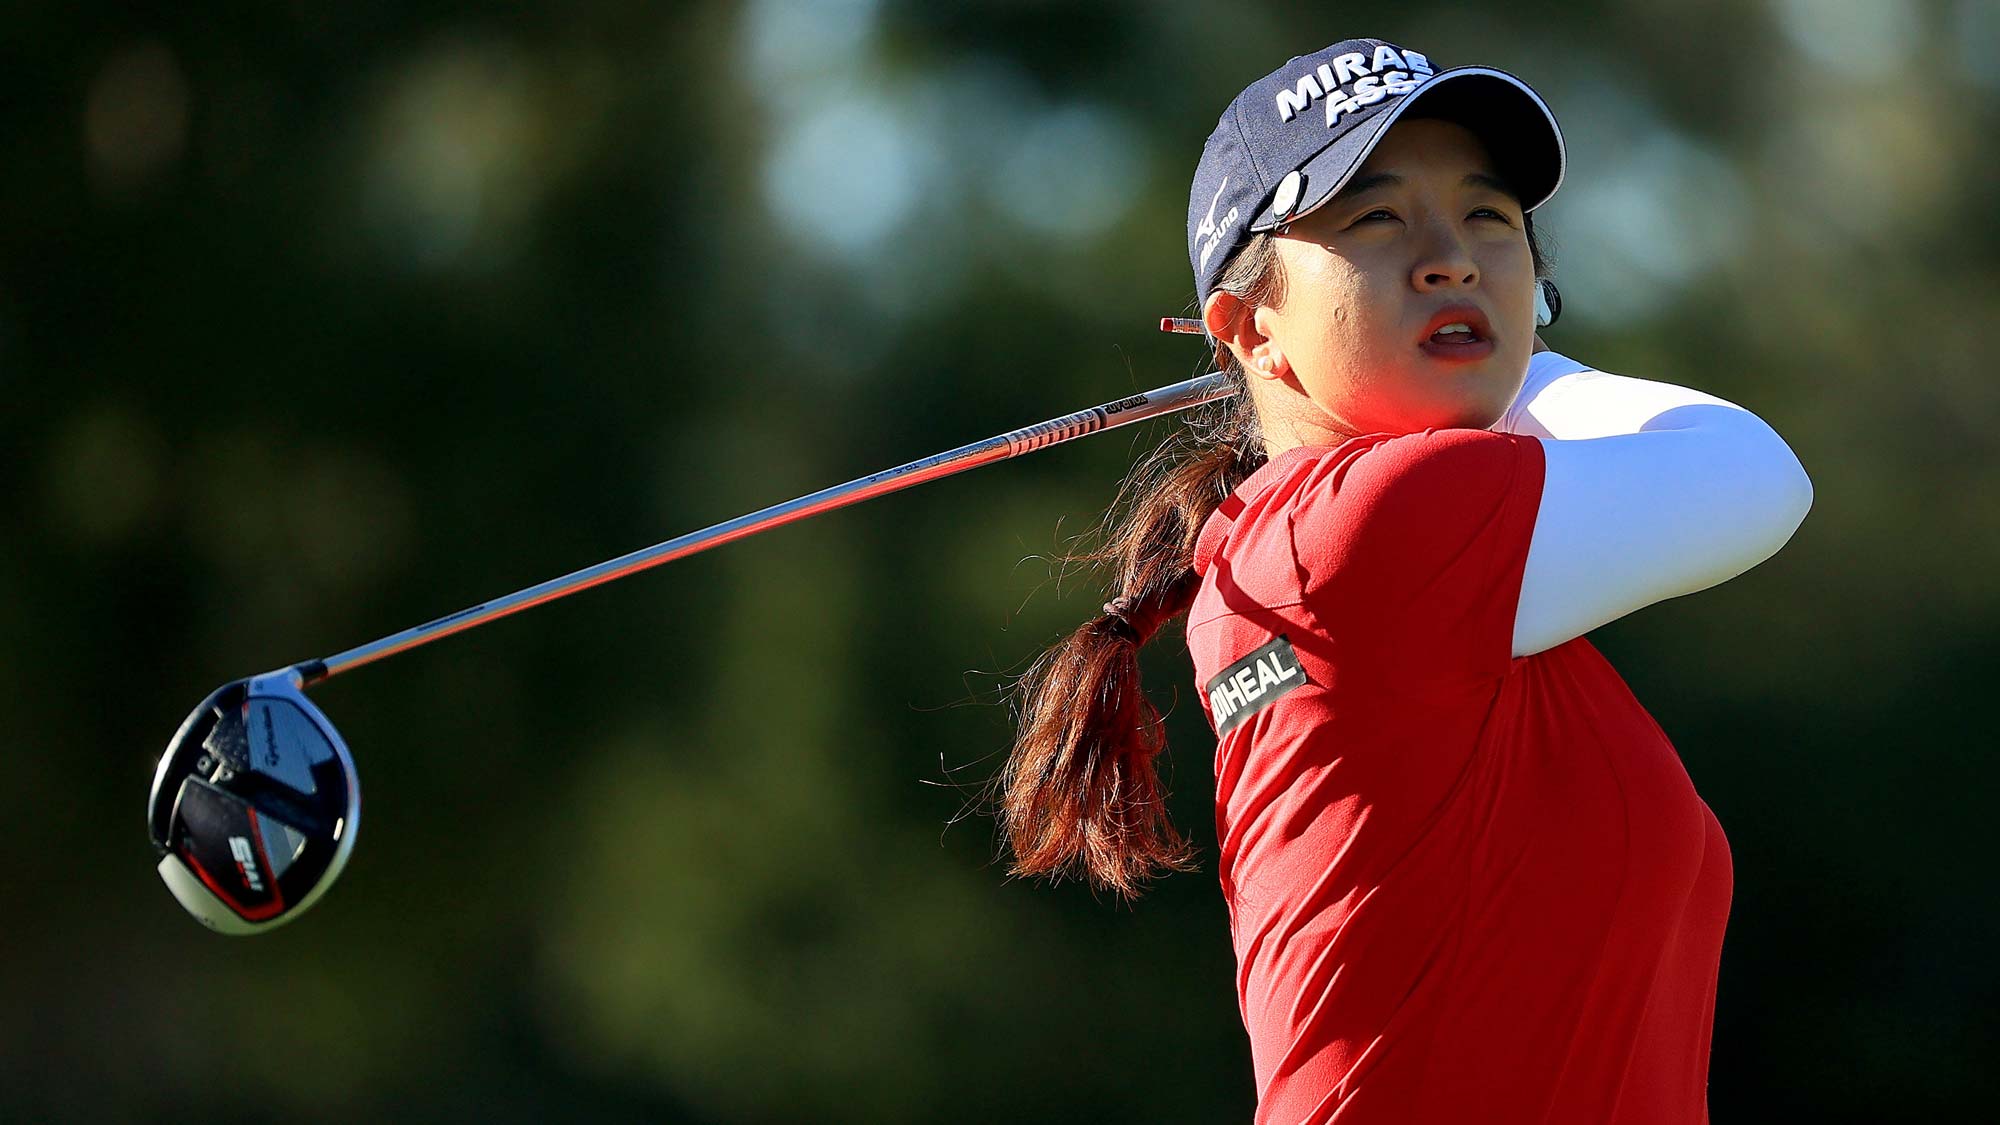 Sei Young Kim of Korea hits her tee shot on the 13th hole during the second round of the Pelican Women's Championship